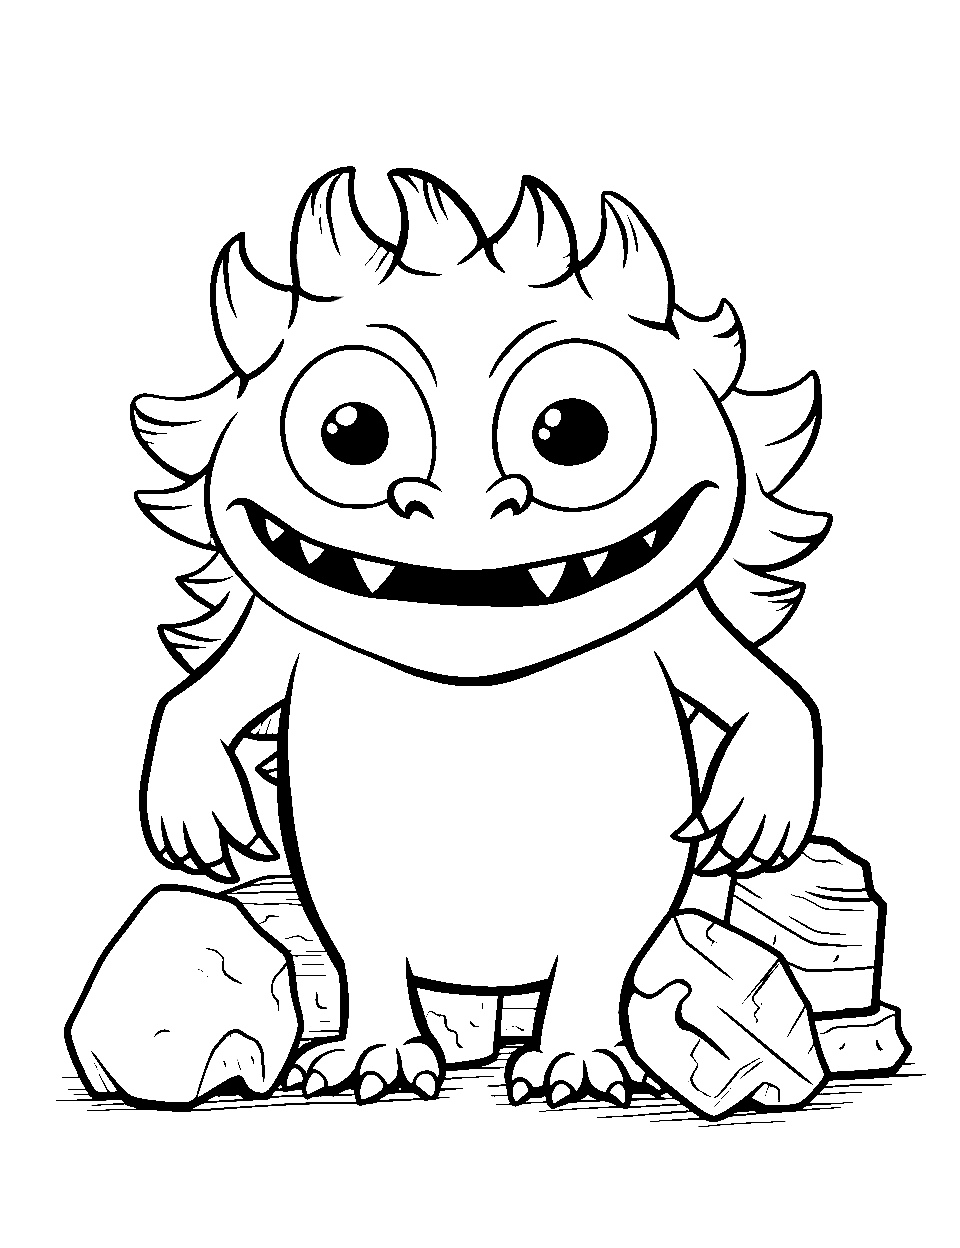 Monster with a Collection of Rocks Coloring Page - A curious monster standing with its collection of various rocks.